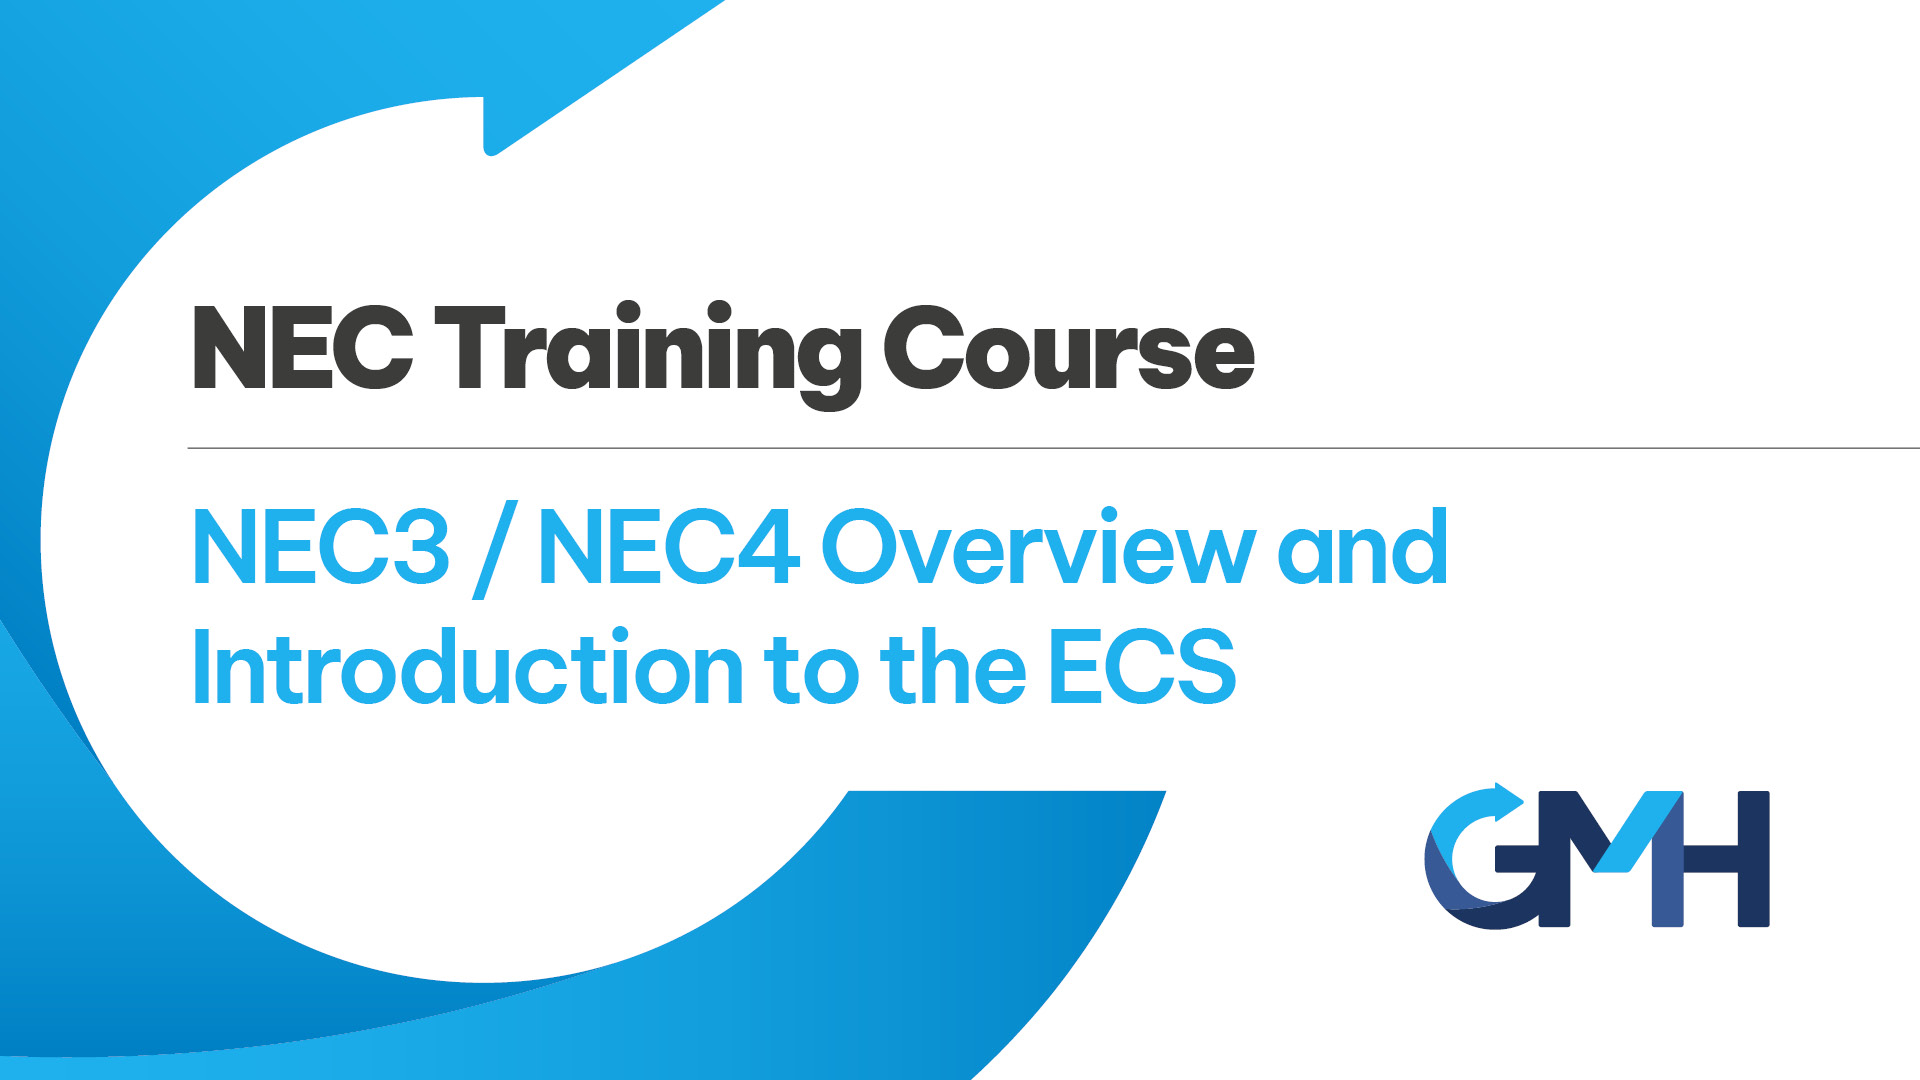 NEC Training Course 11: NEC3 / NEC4 Overview and Introduction to the Engineering and Construction Subcontract (ECS) by GMH Planning Ltd